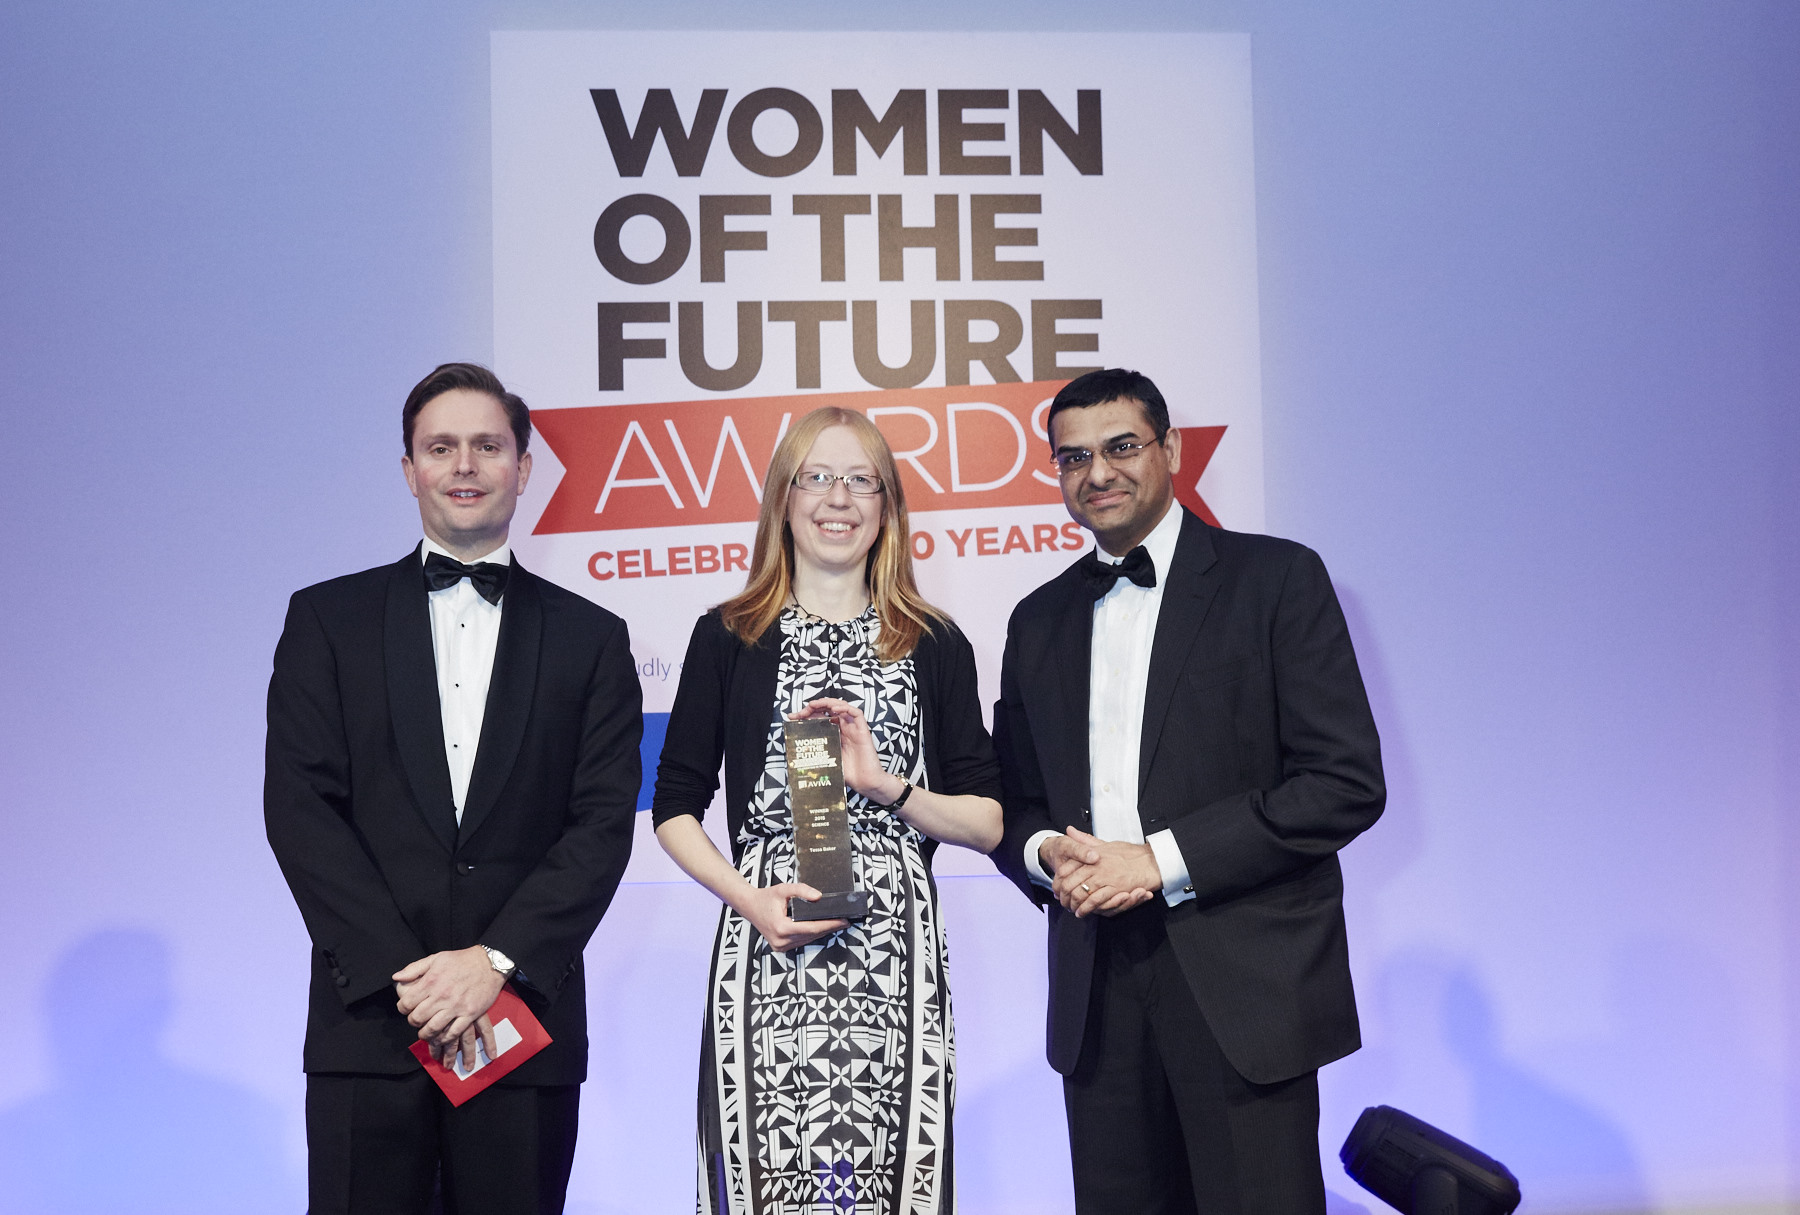 Nominations for the Women of the Future Awards 2016 are now open!